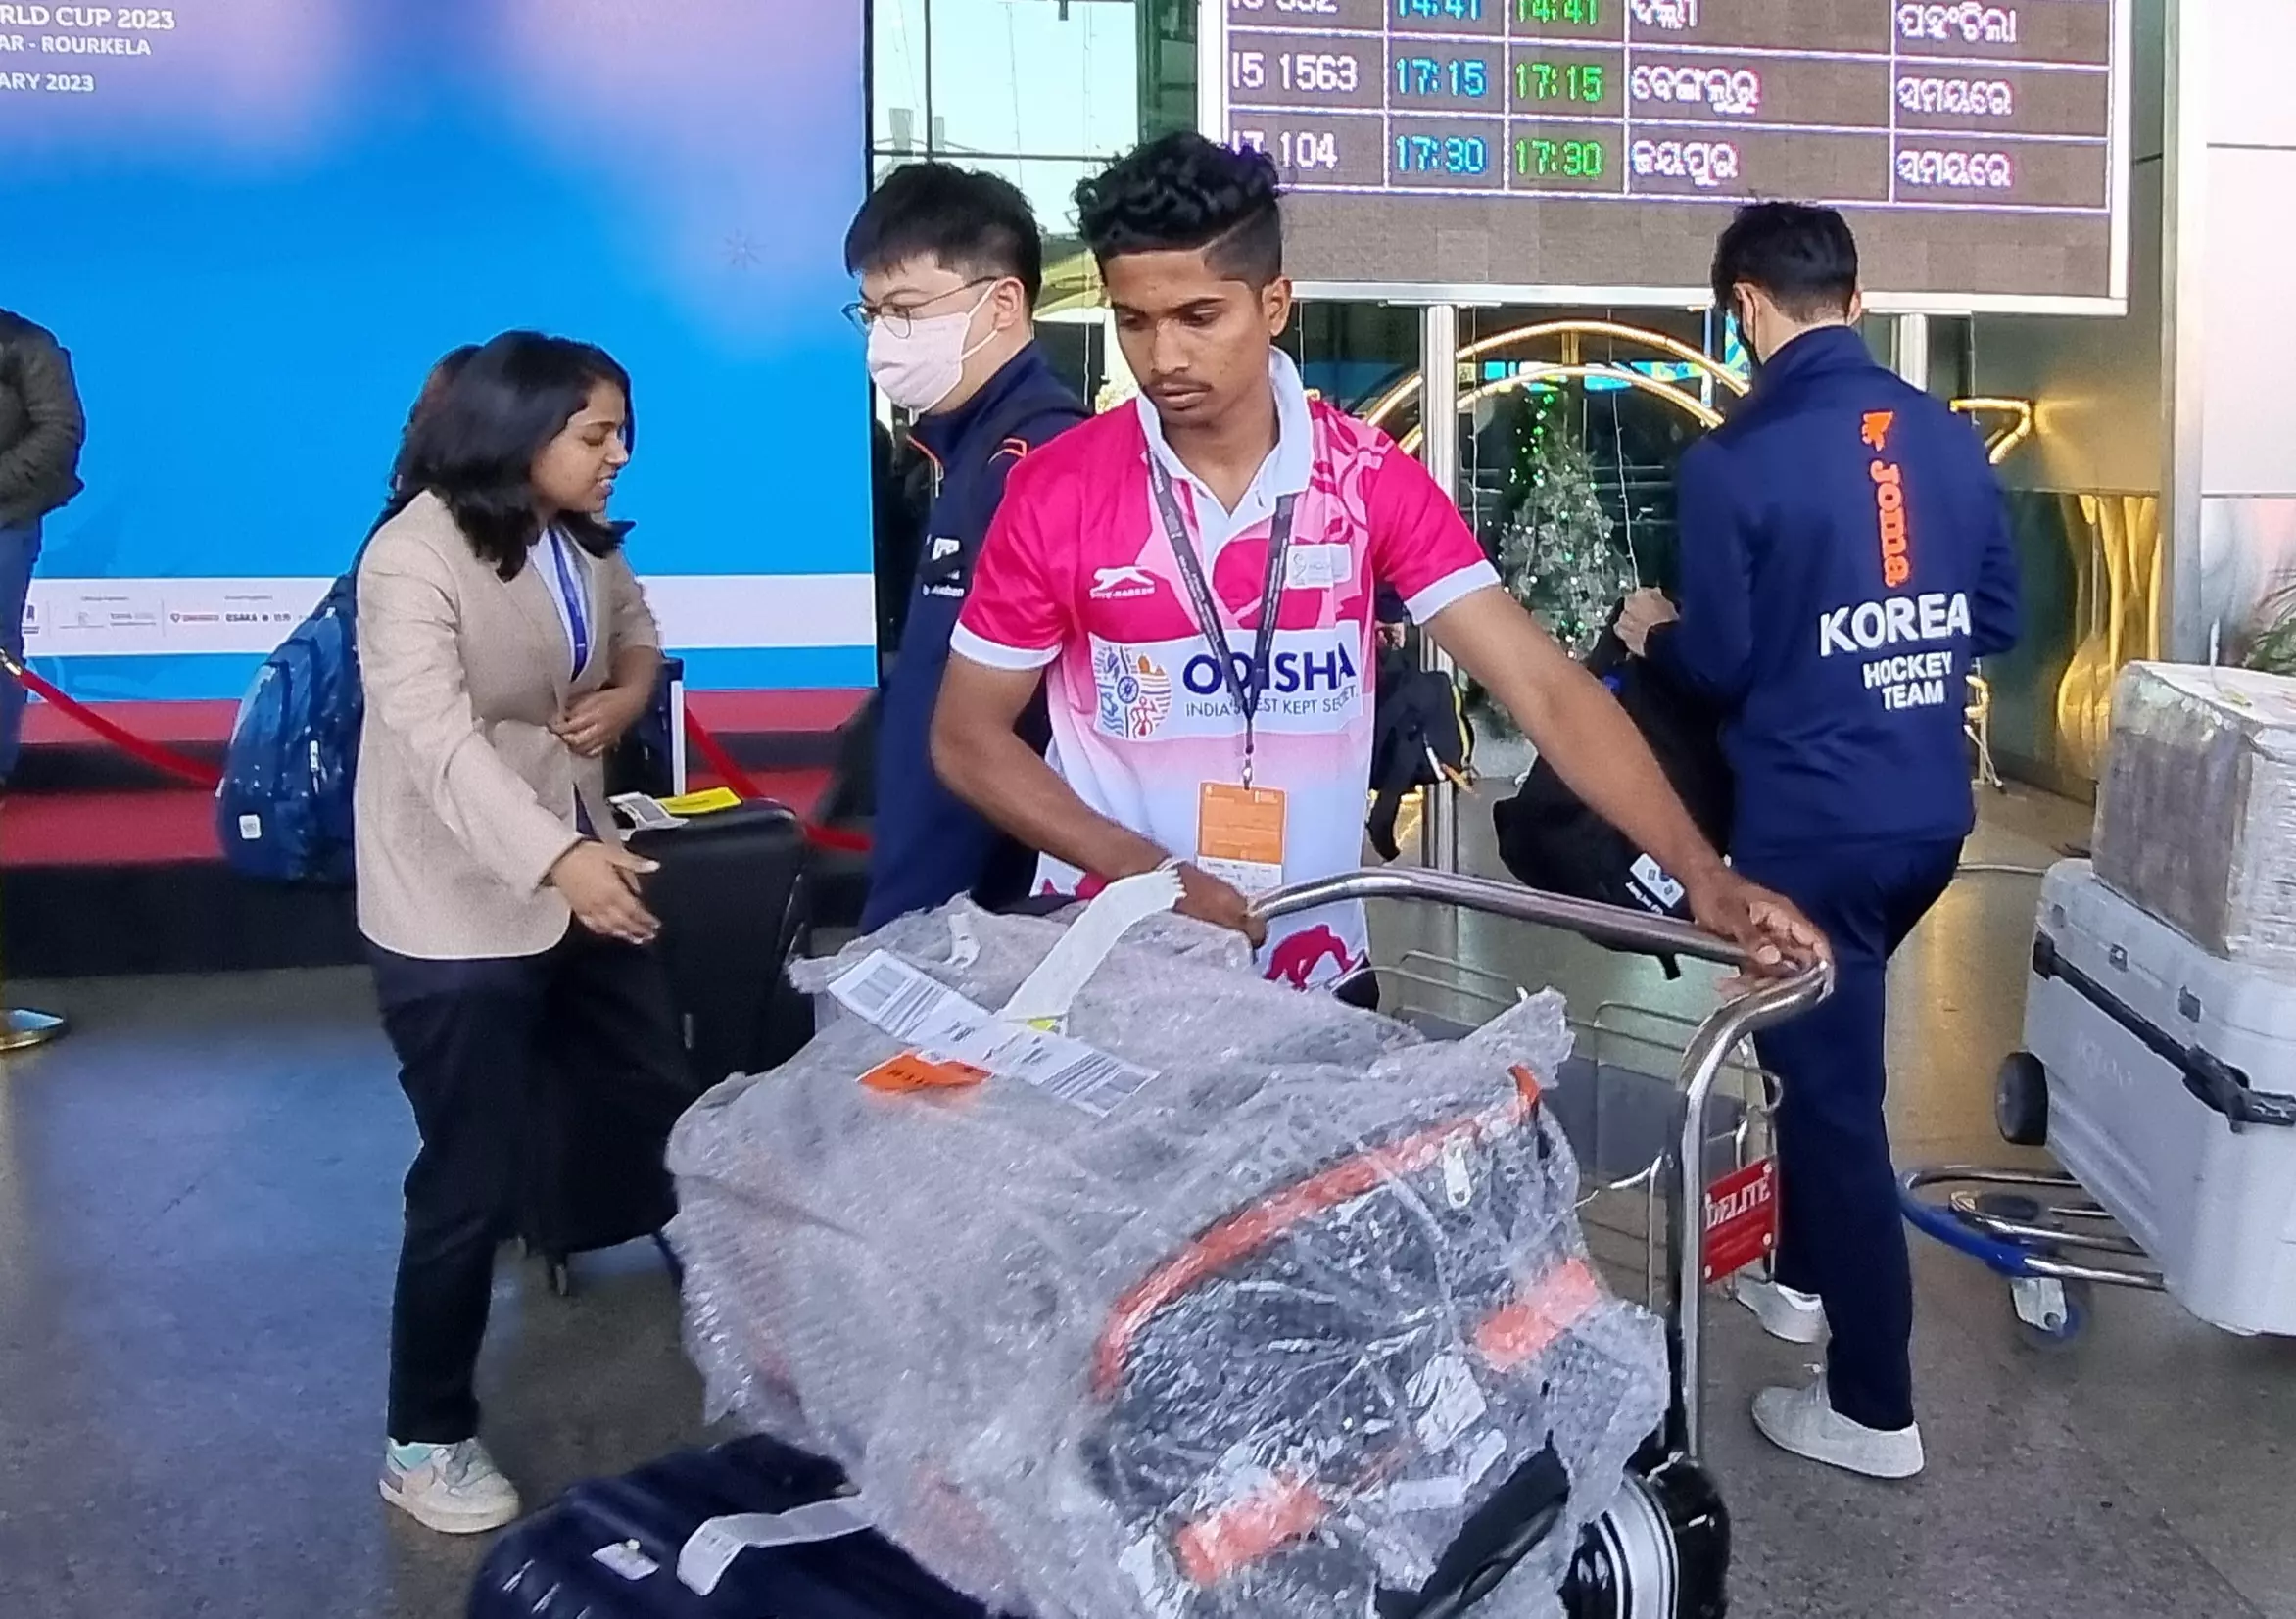 A volunteer helps the South Korean team with their luggage upon their arrival in Bhubaneswar